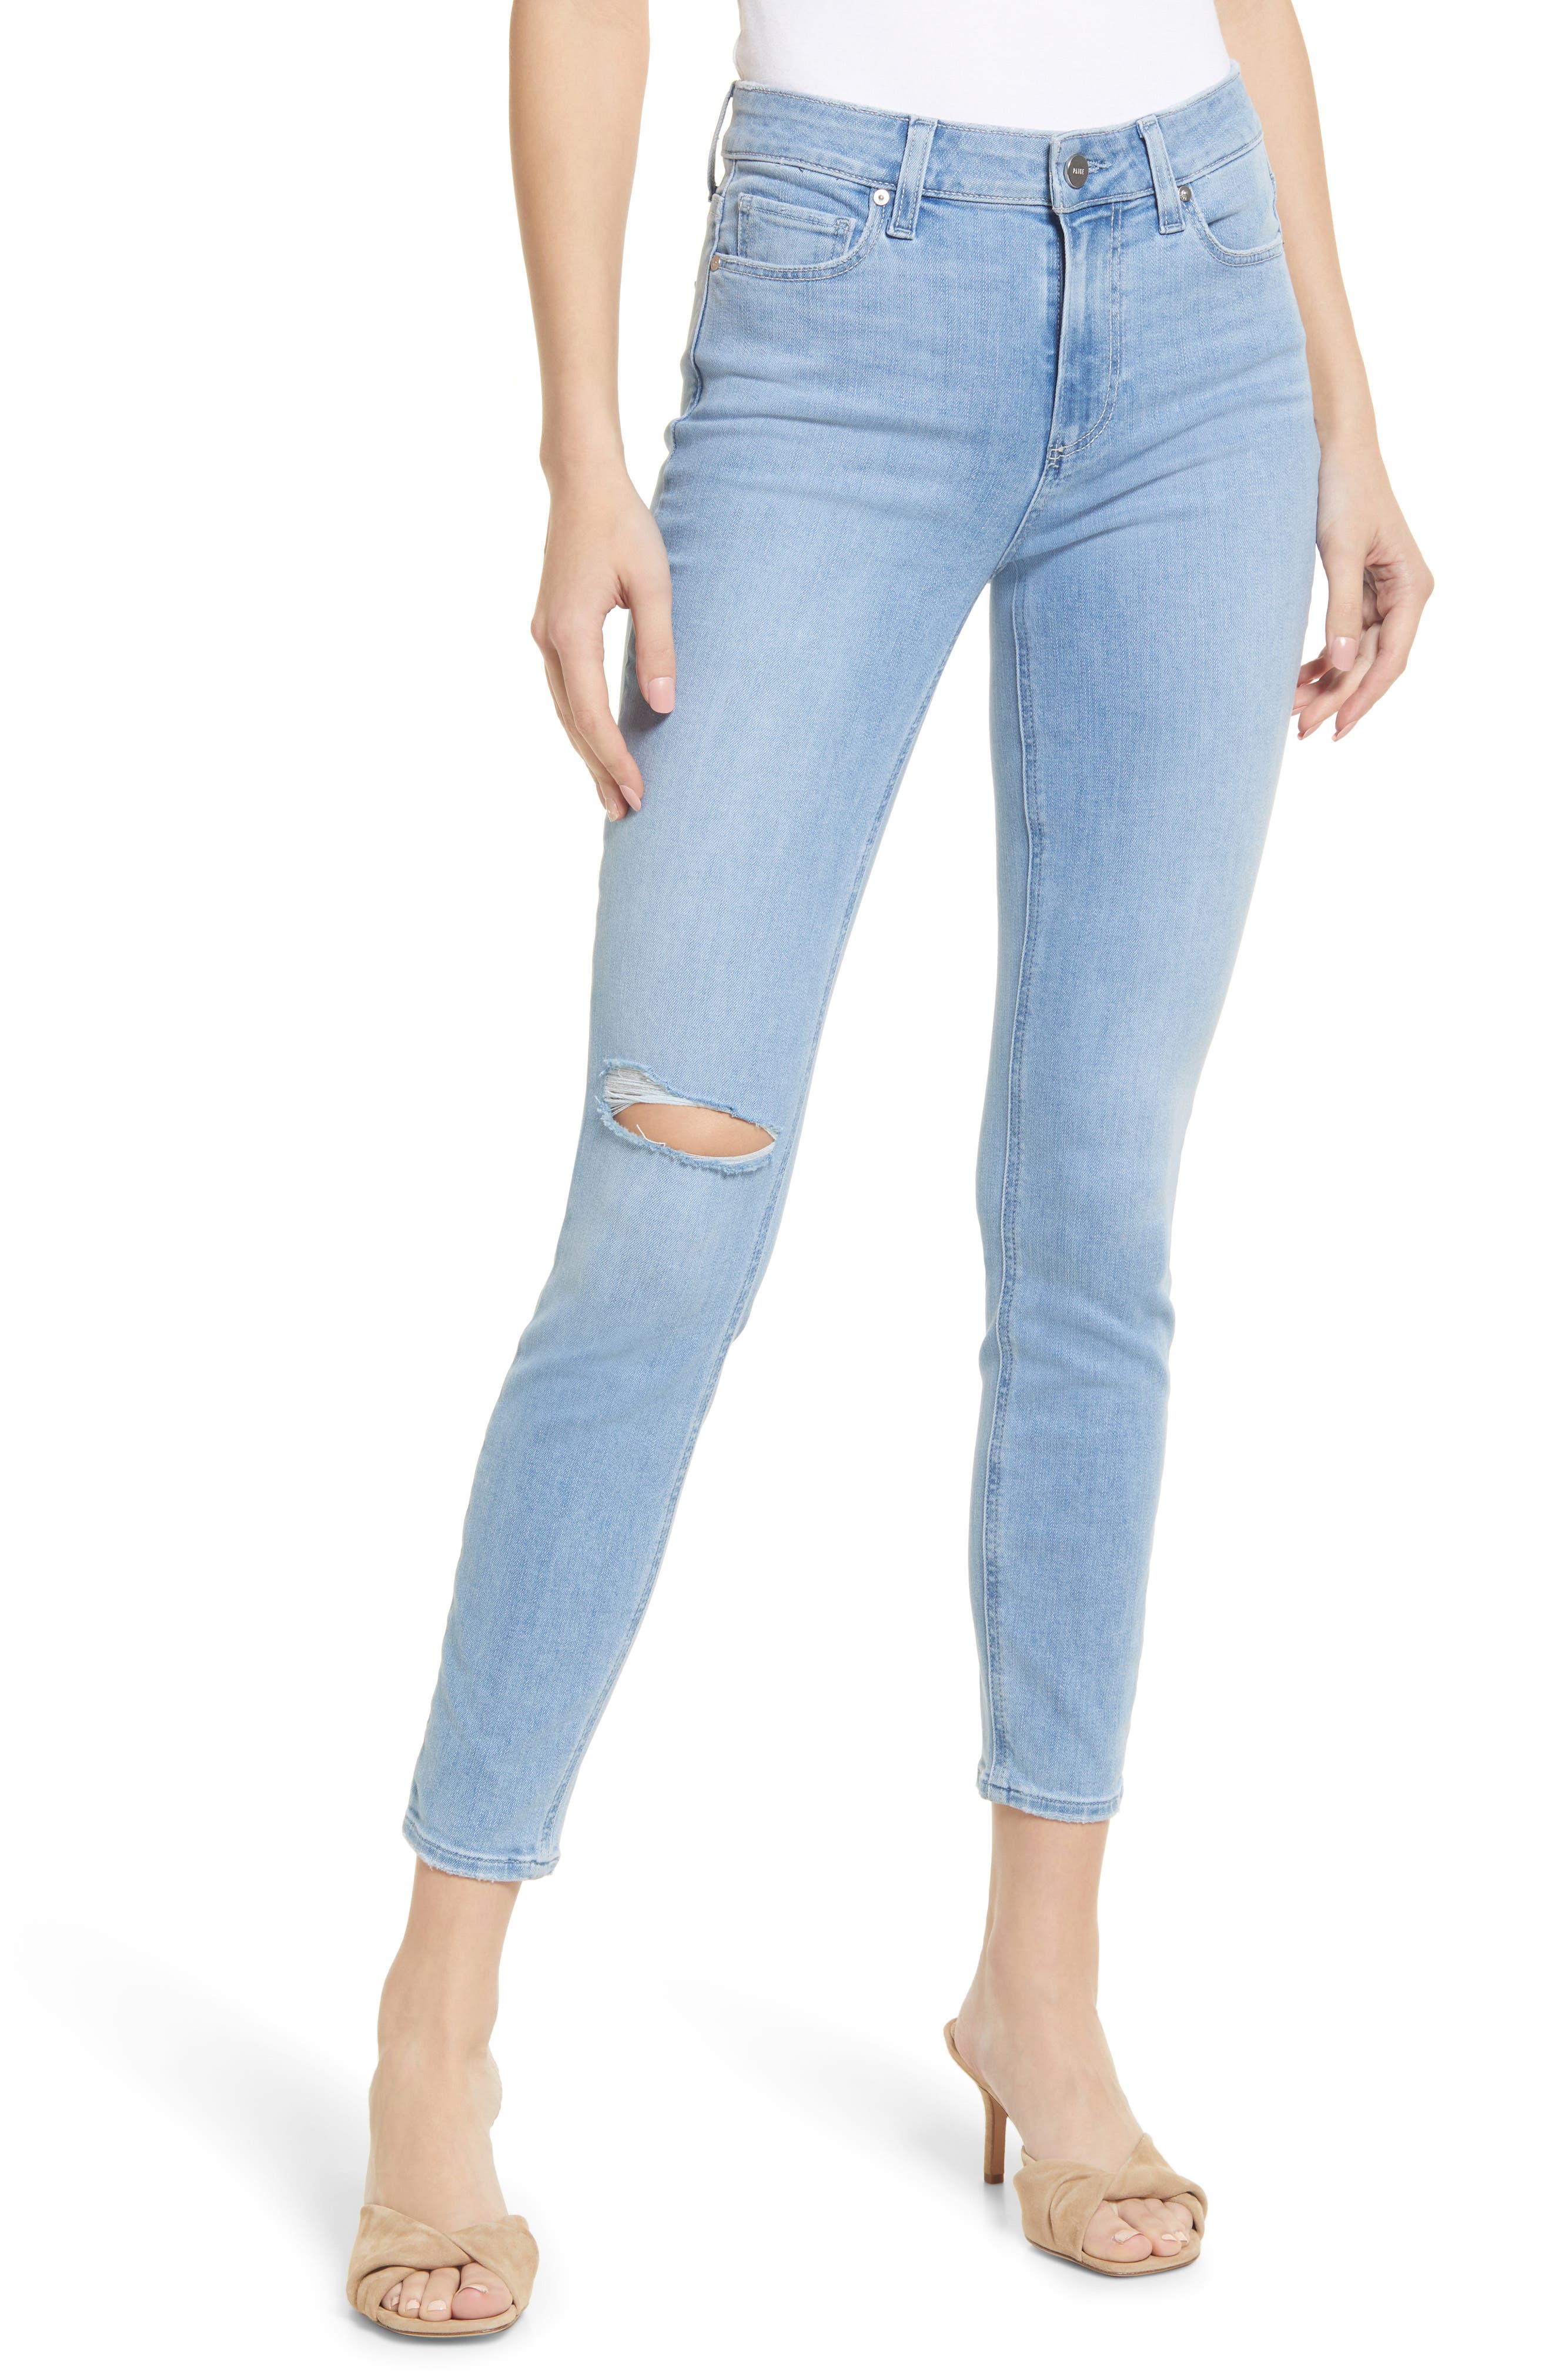 Womens Clothing Jeans Skinny jeans PAIGE Denim Hoxton Ankle Skinny Jeans in Blue 